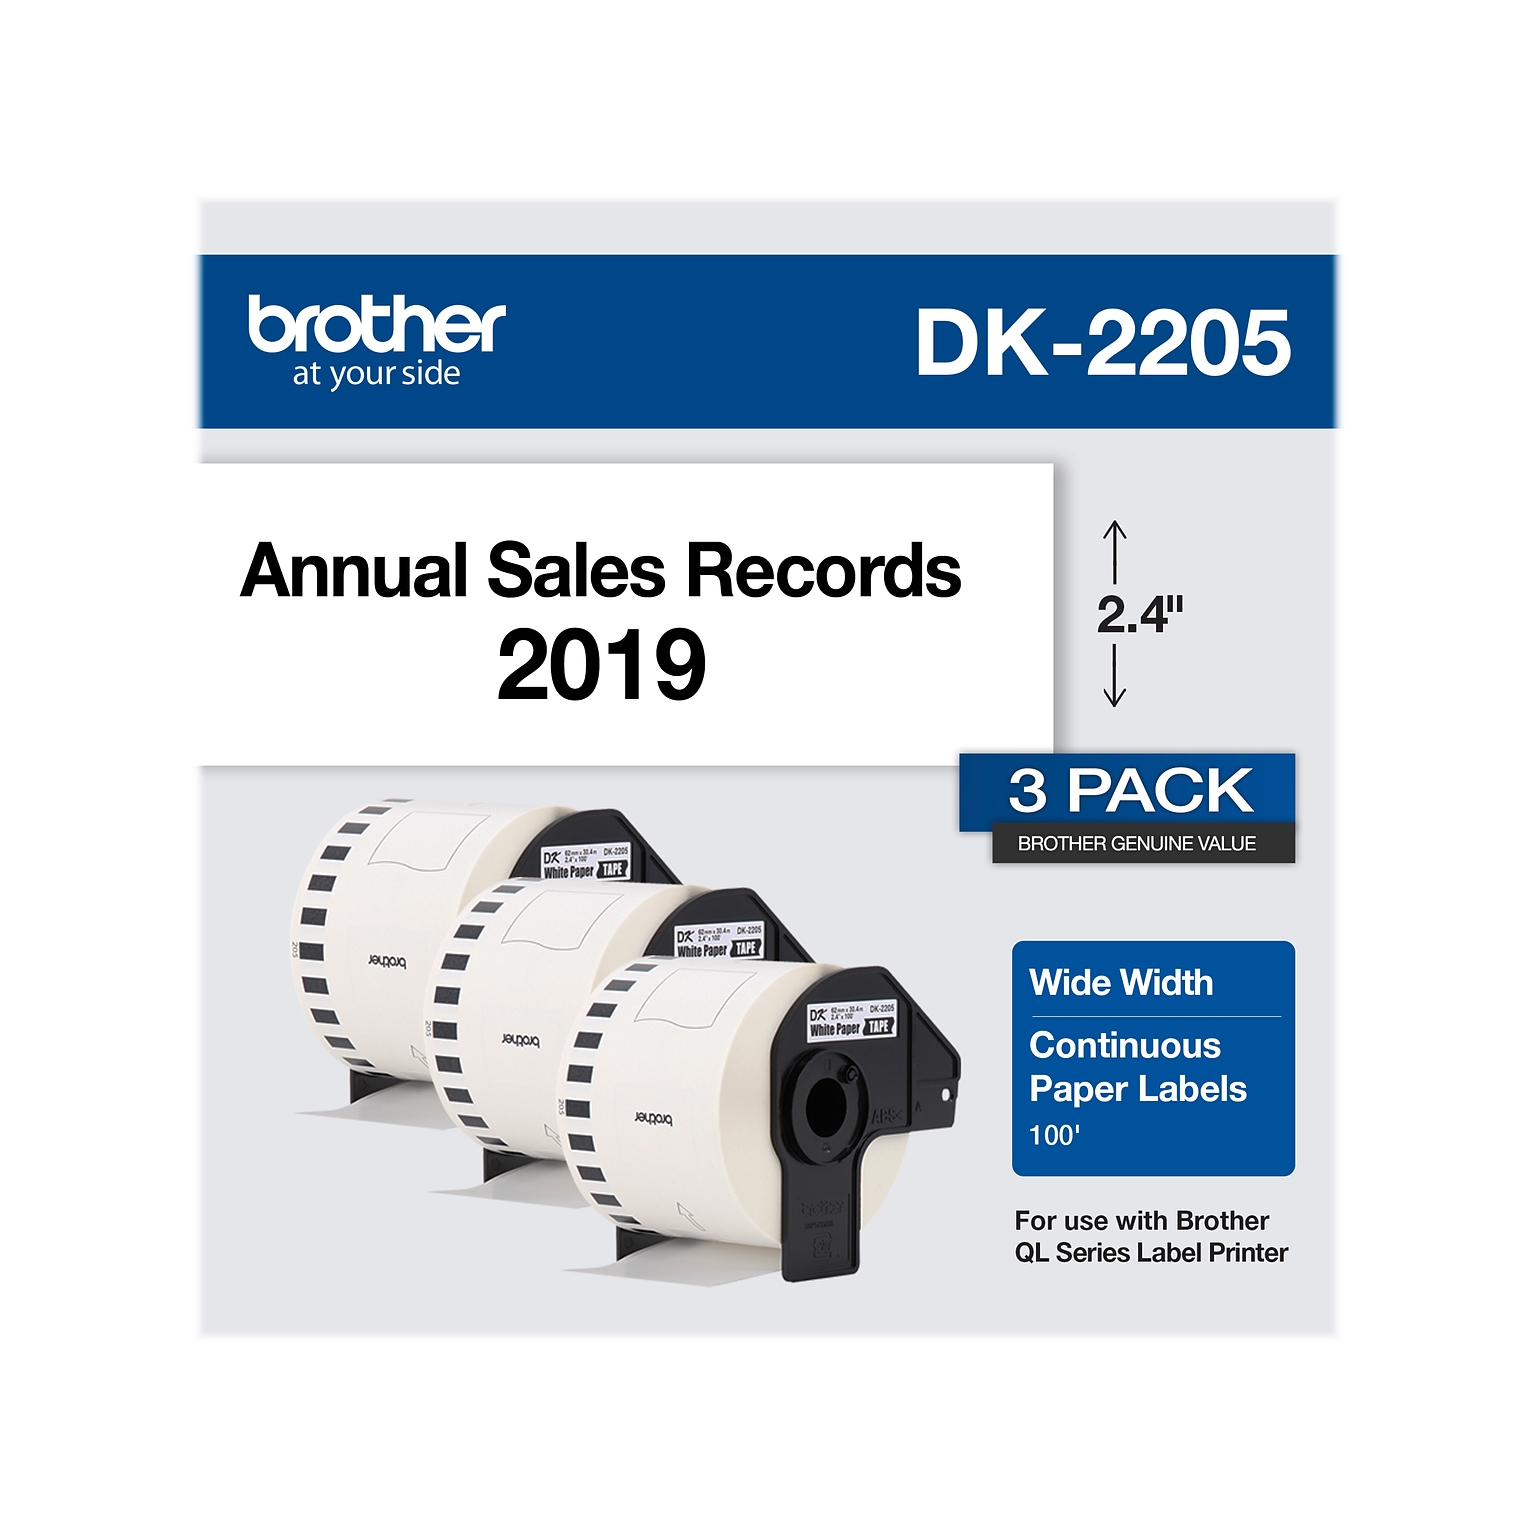 Brother DK-2205 Wide Width Continuous Paper Labels, 2-4/10 x 100, Black on White, 3 Rolls/Box (DK-22053PK)